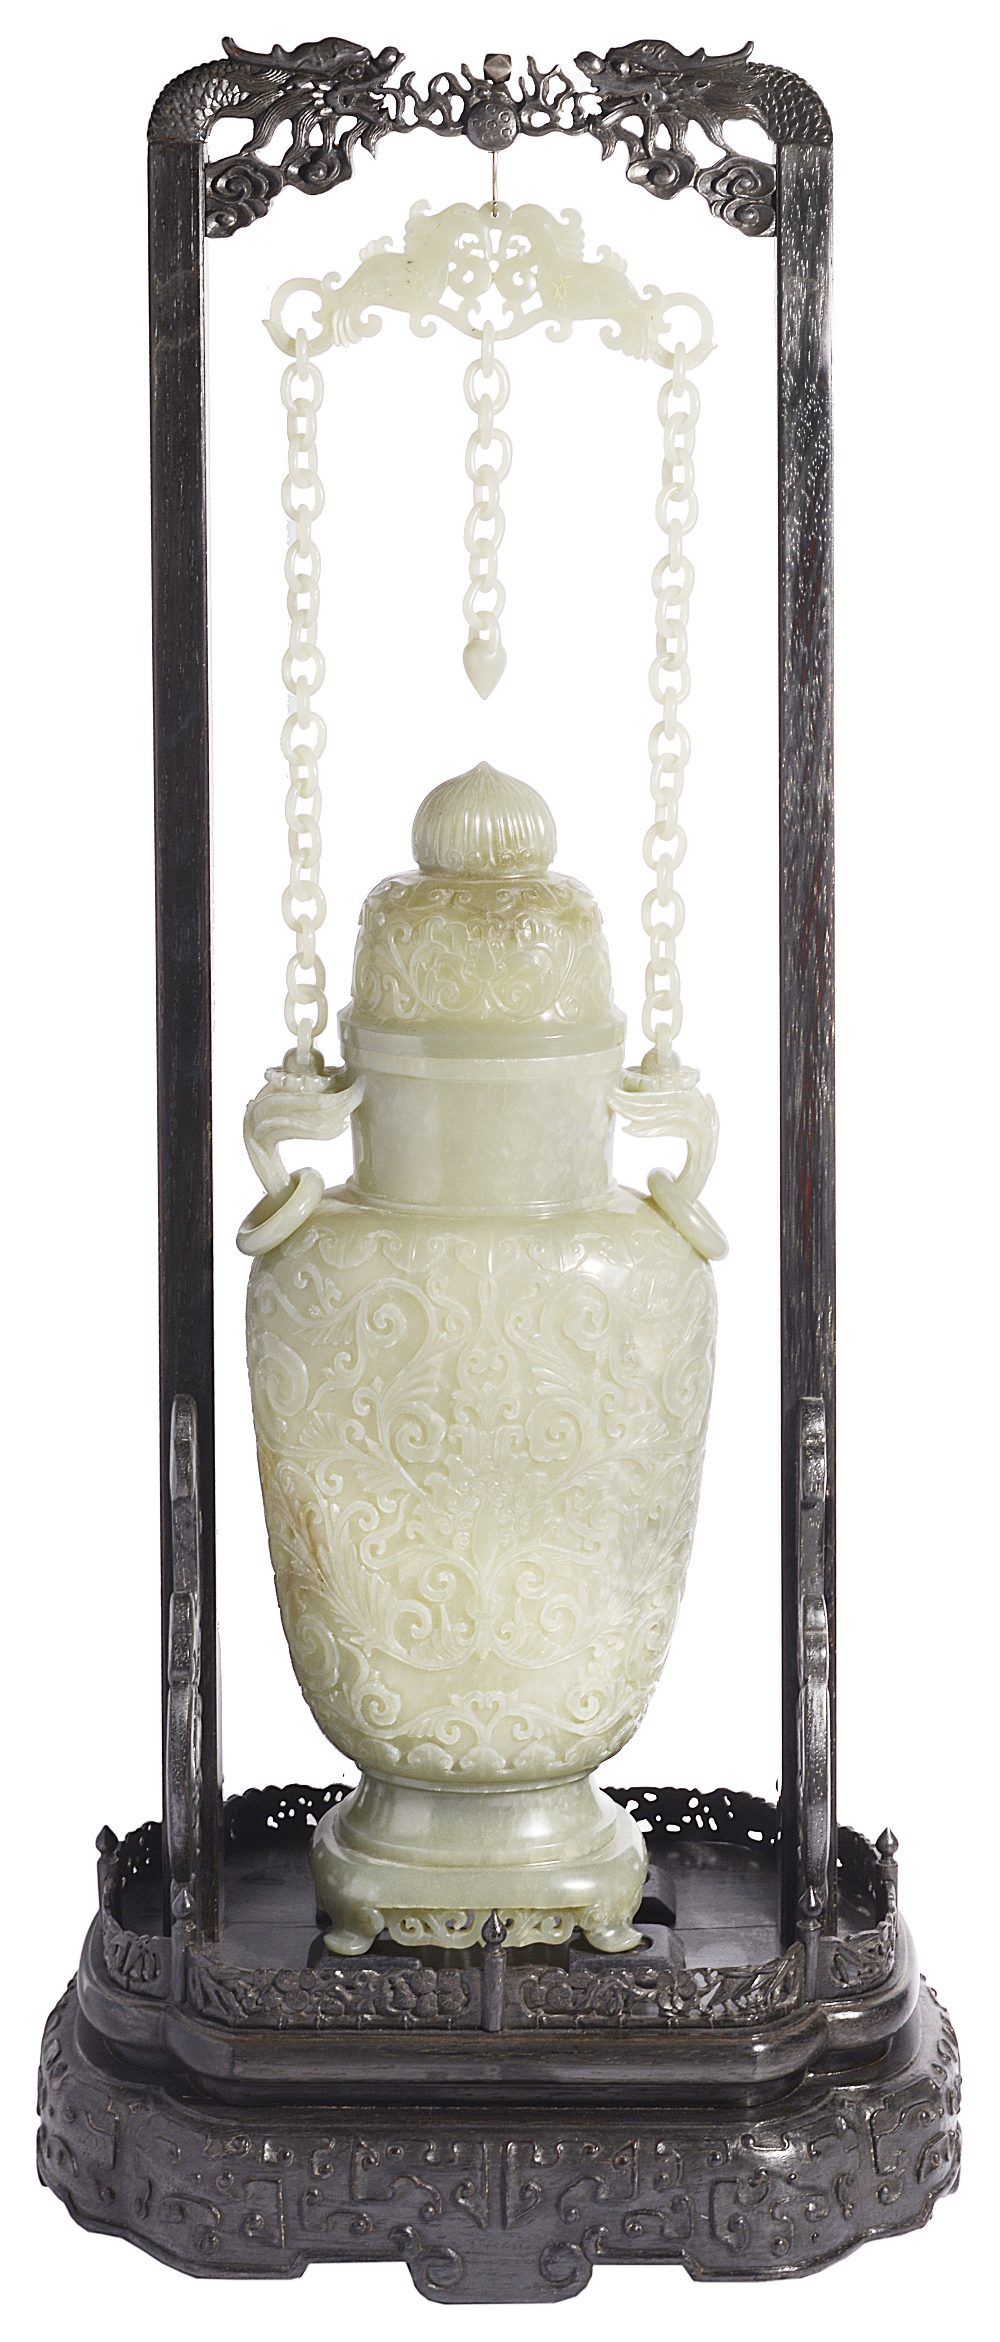 A CHINESE MUGHAL-STYLE JADE BALUSTER VASE AND COVER WITH CHAIN HANDLE the flattened baluster body